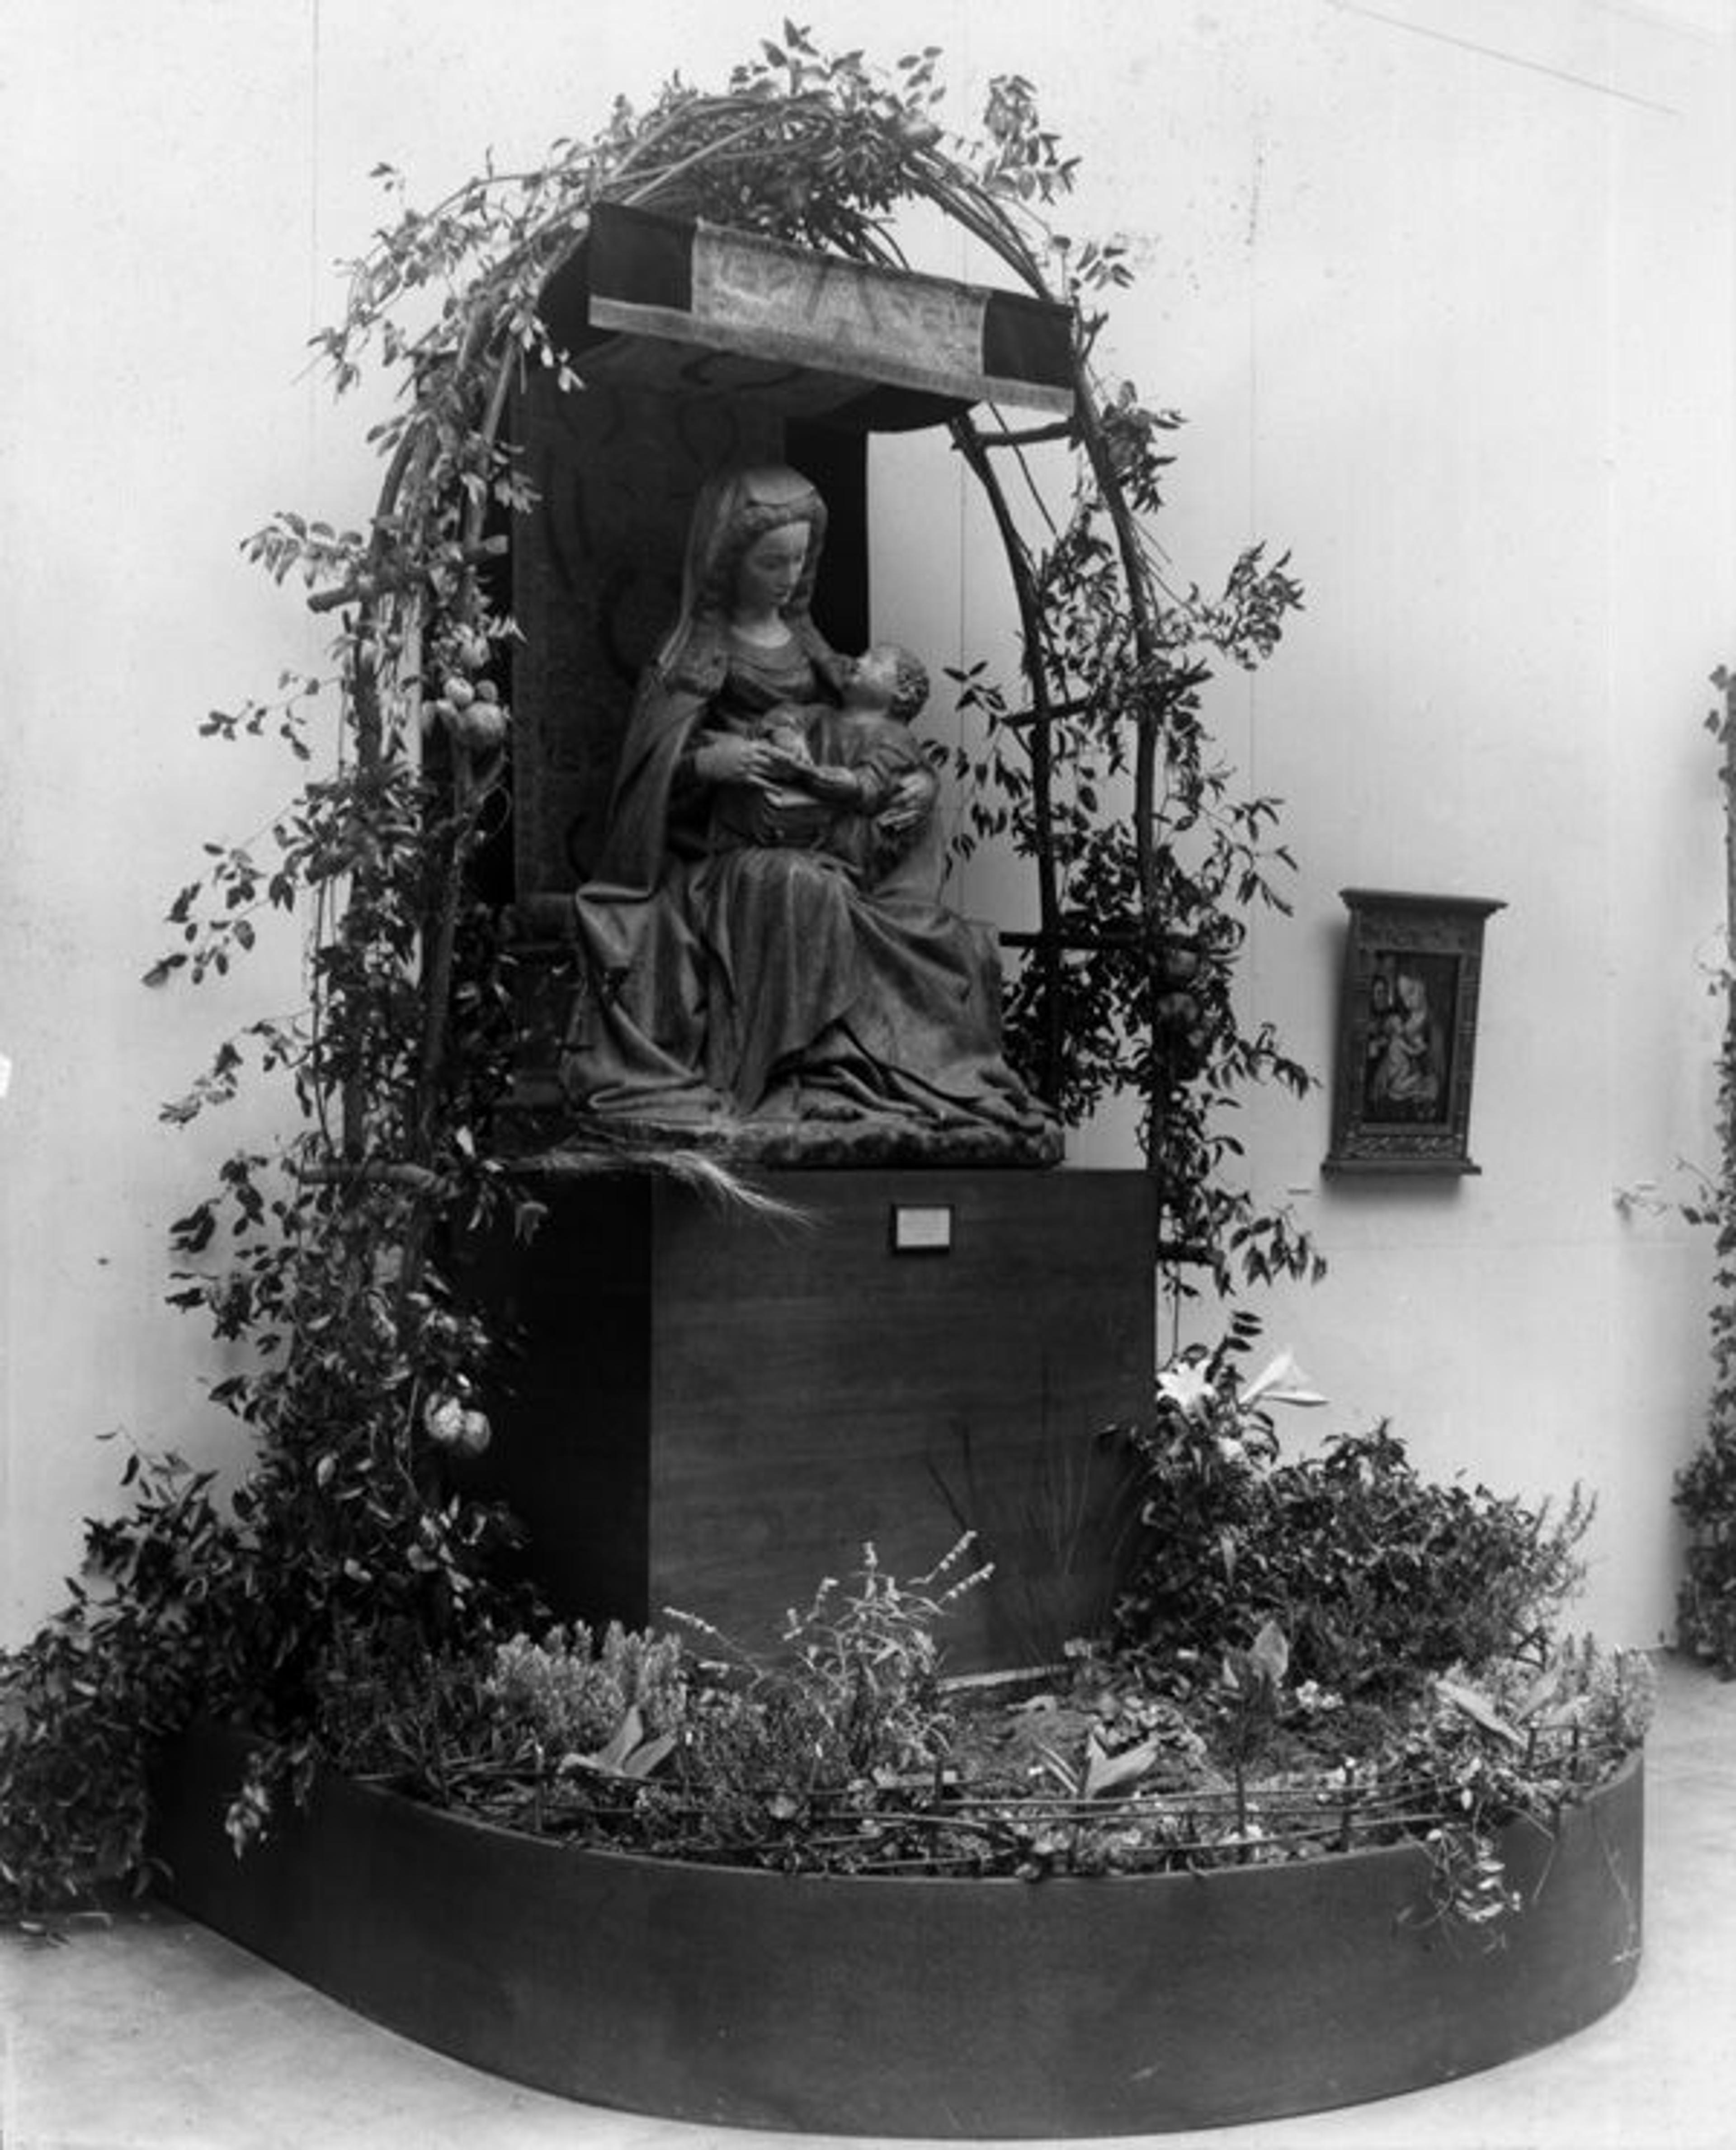 "The Madonna and Child: a Christmas Exhibition" (December 16, 1939-January 7, 1940)